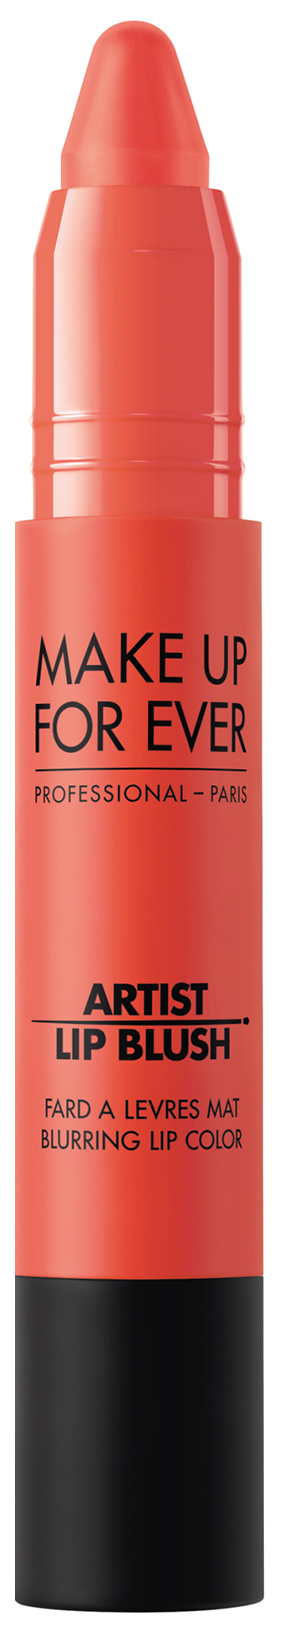 Помада Make Up For Ever Artist Lip Blush 301 Spicy Coral 2,5 г